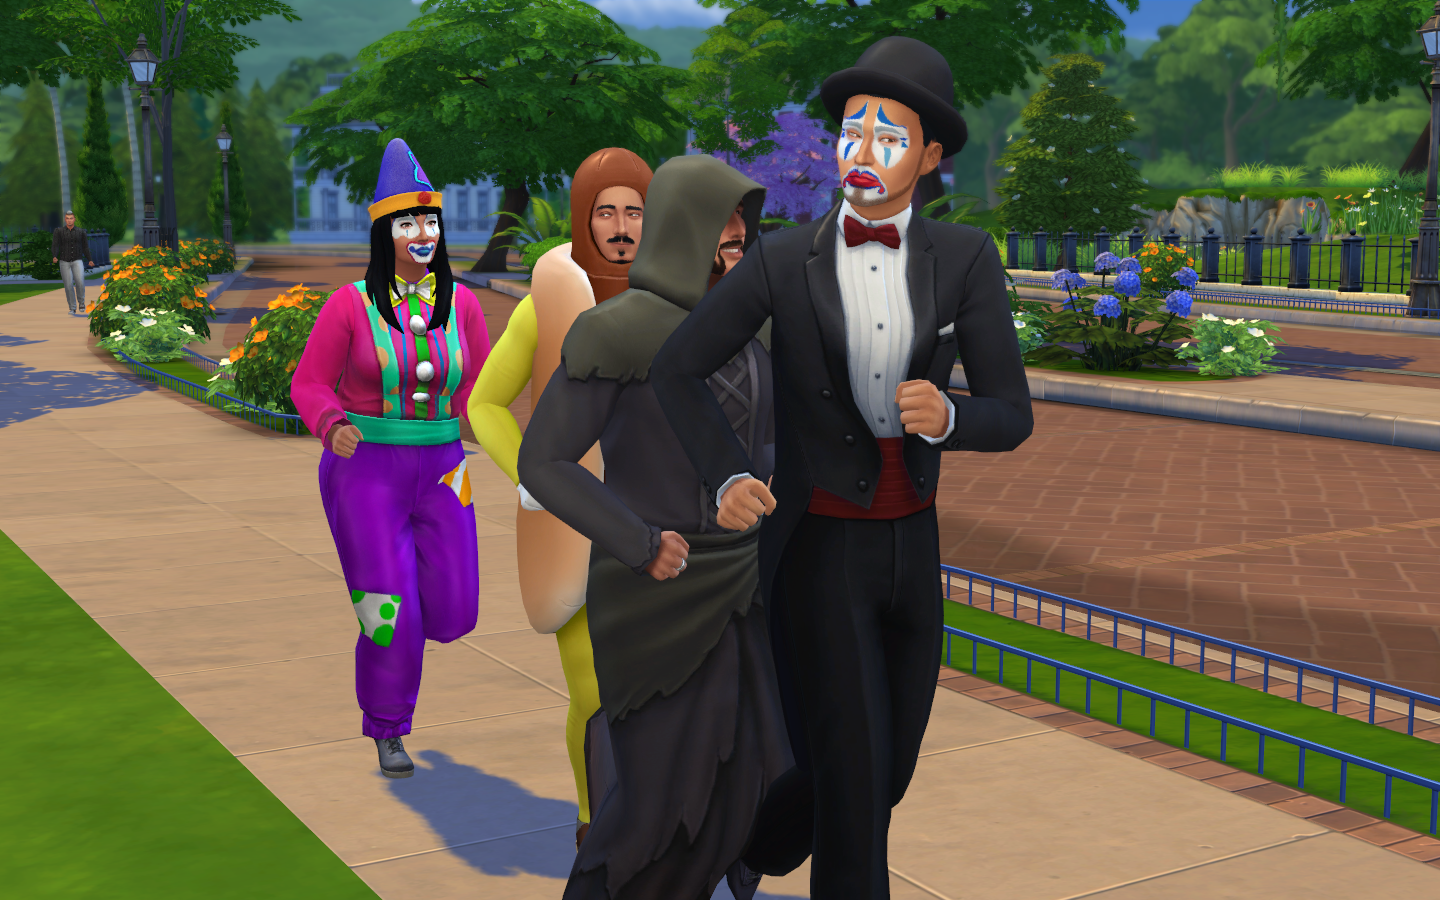 The Sims 4: Digital Deluxe Edition Content Overview